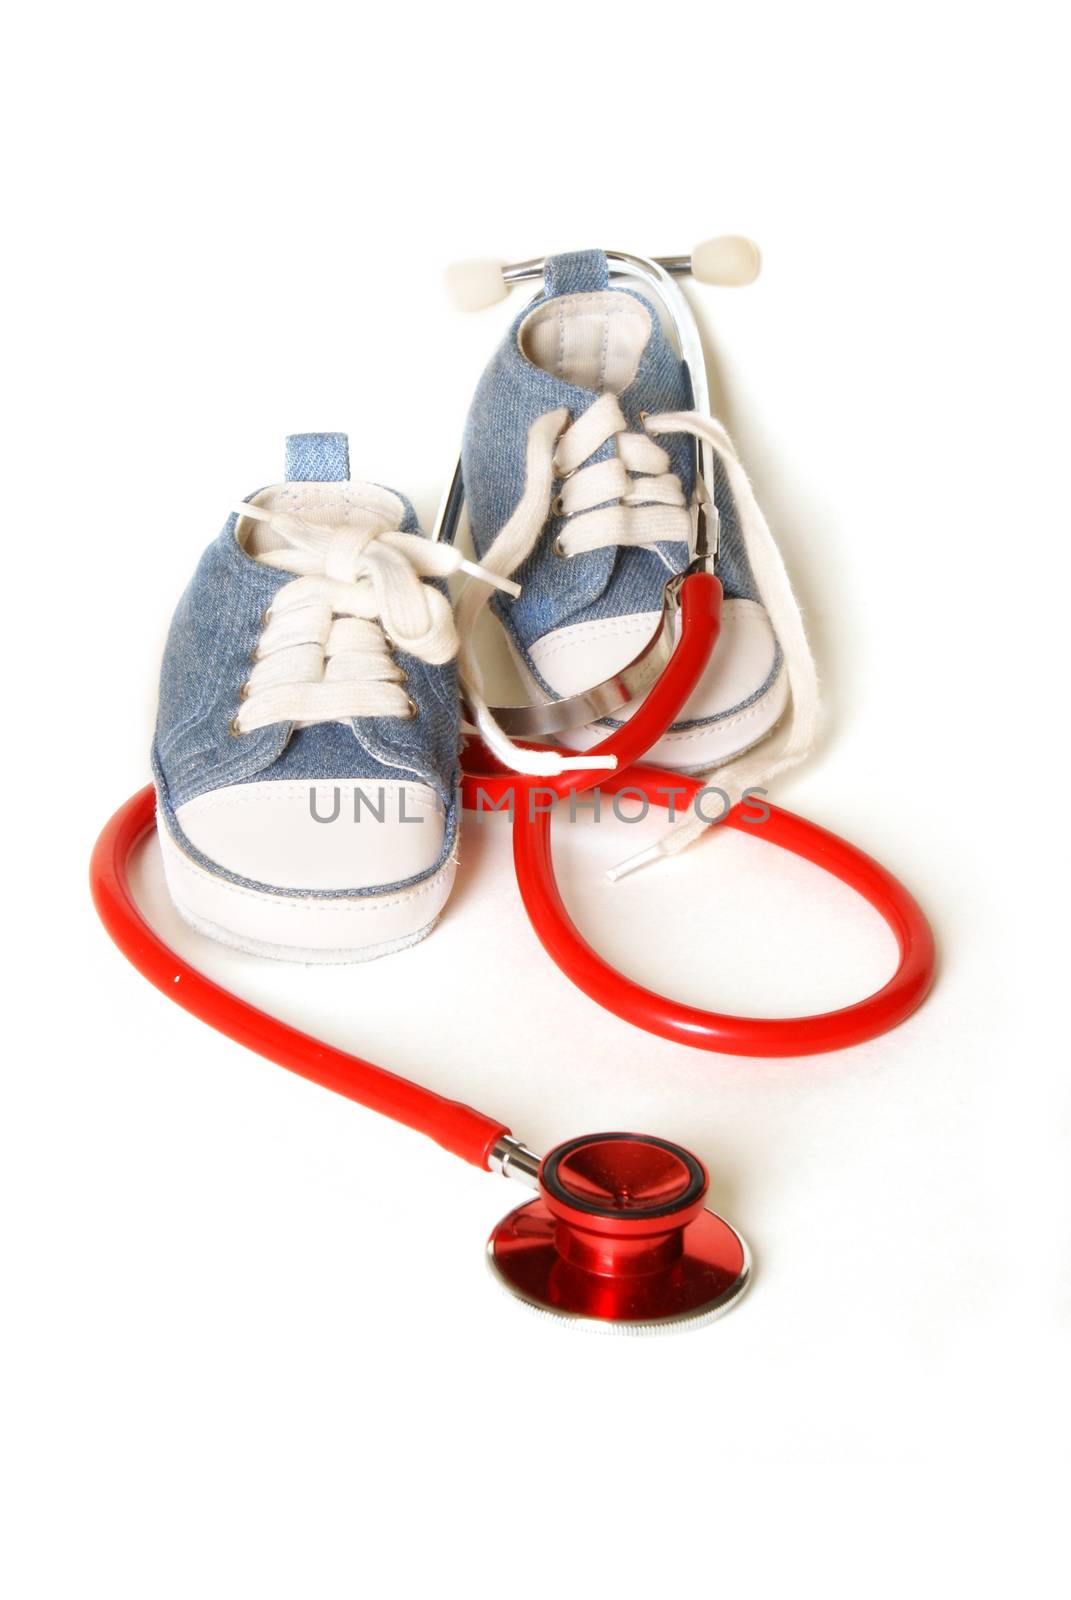 Isolated denim baby shoes and a doctors stethoscope representing childcare prediatrics.